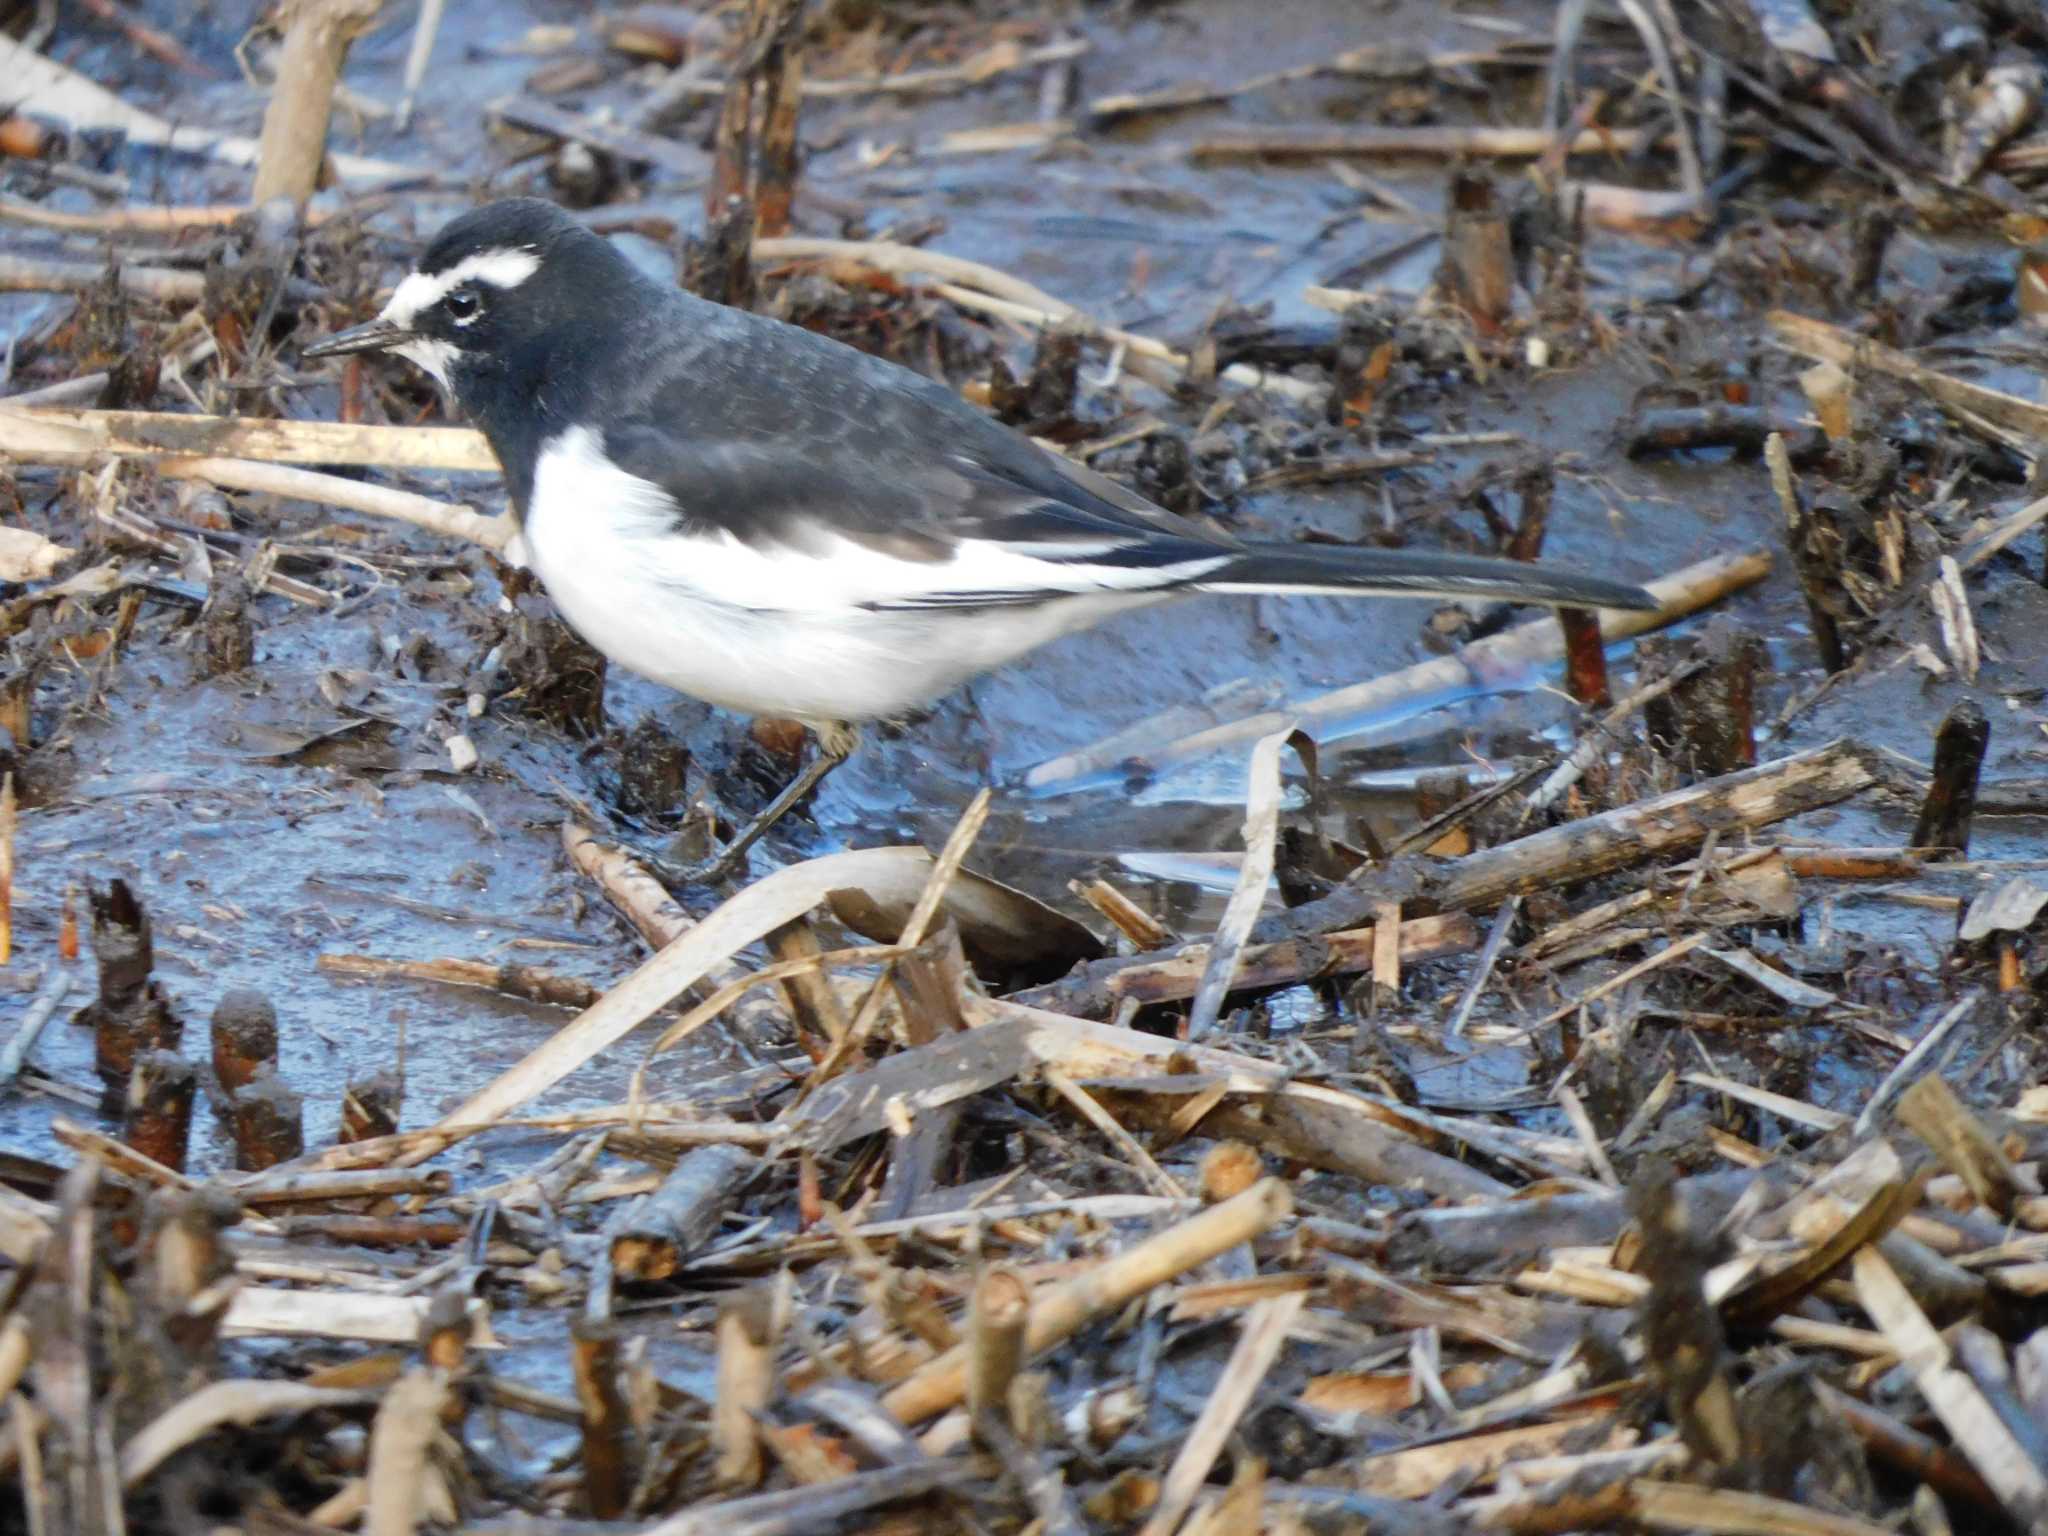 Photo of Japanese Wagtail at Kitamoto Nature Observation Park by ななほしてんとうむし